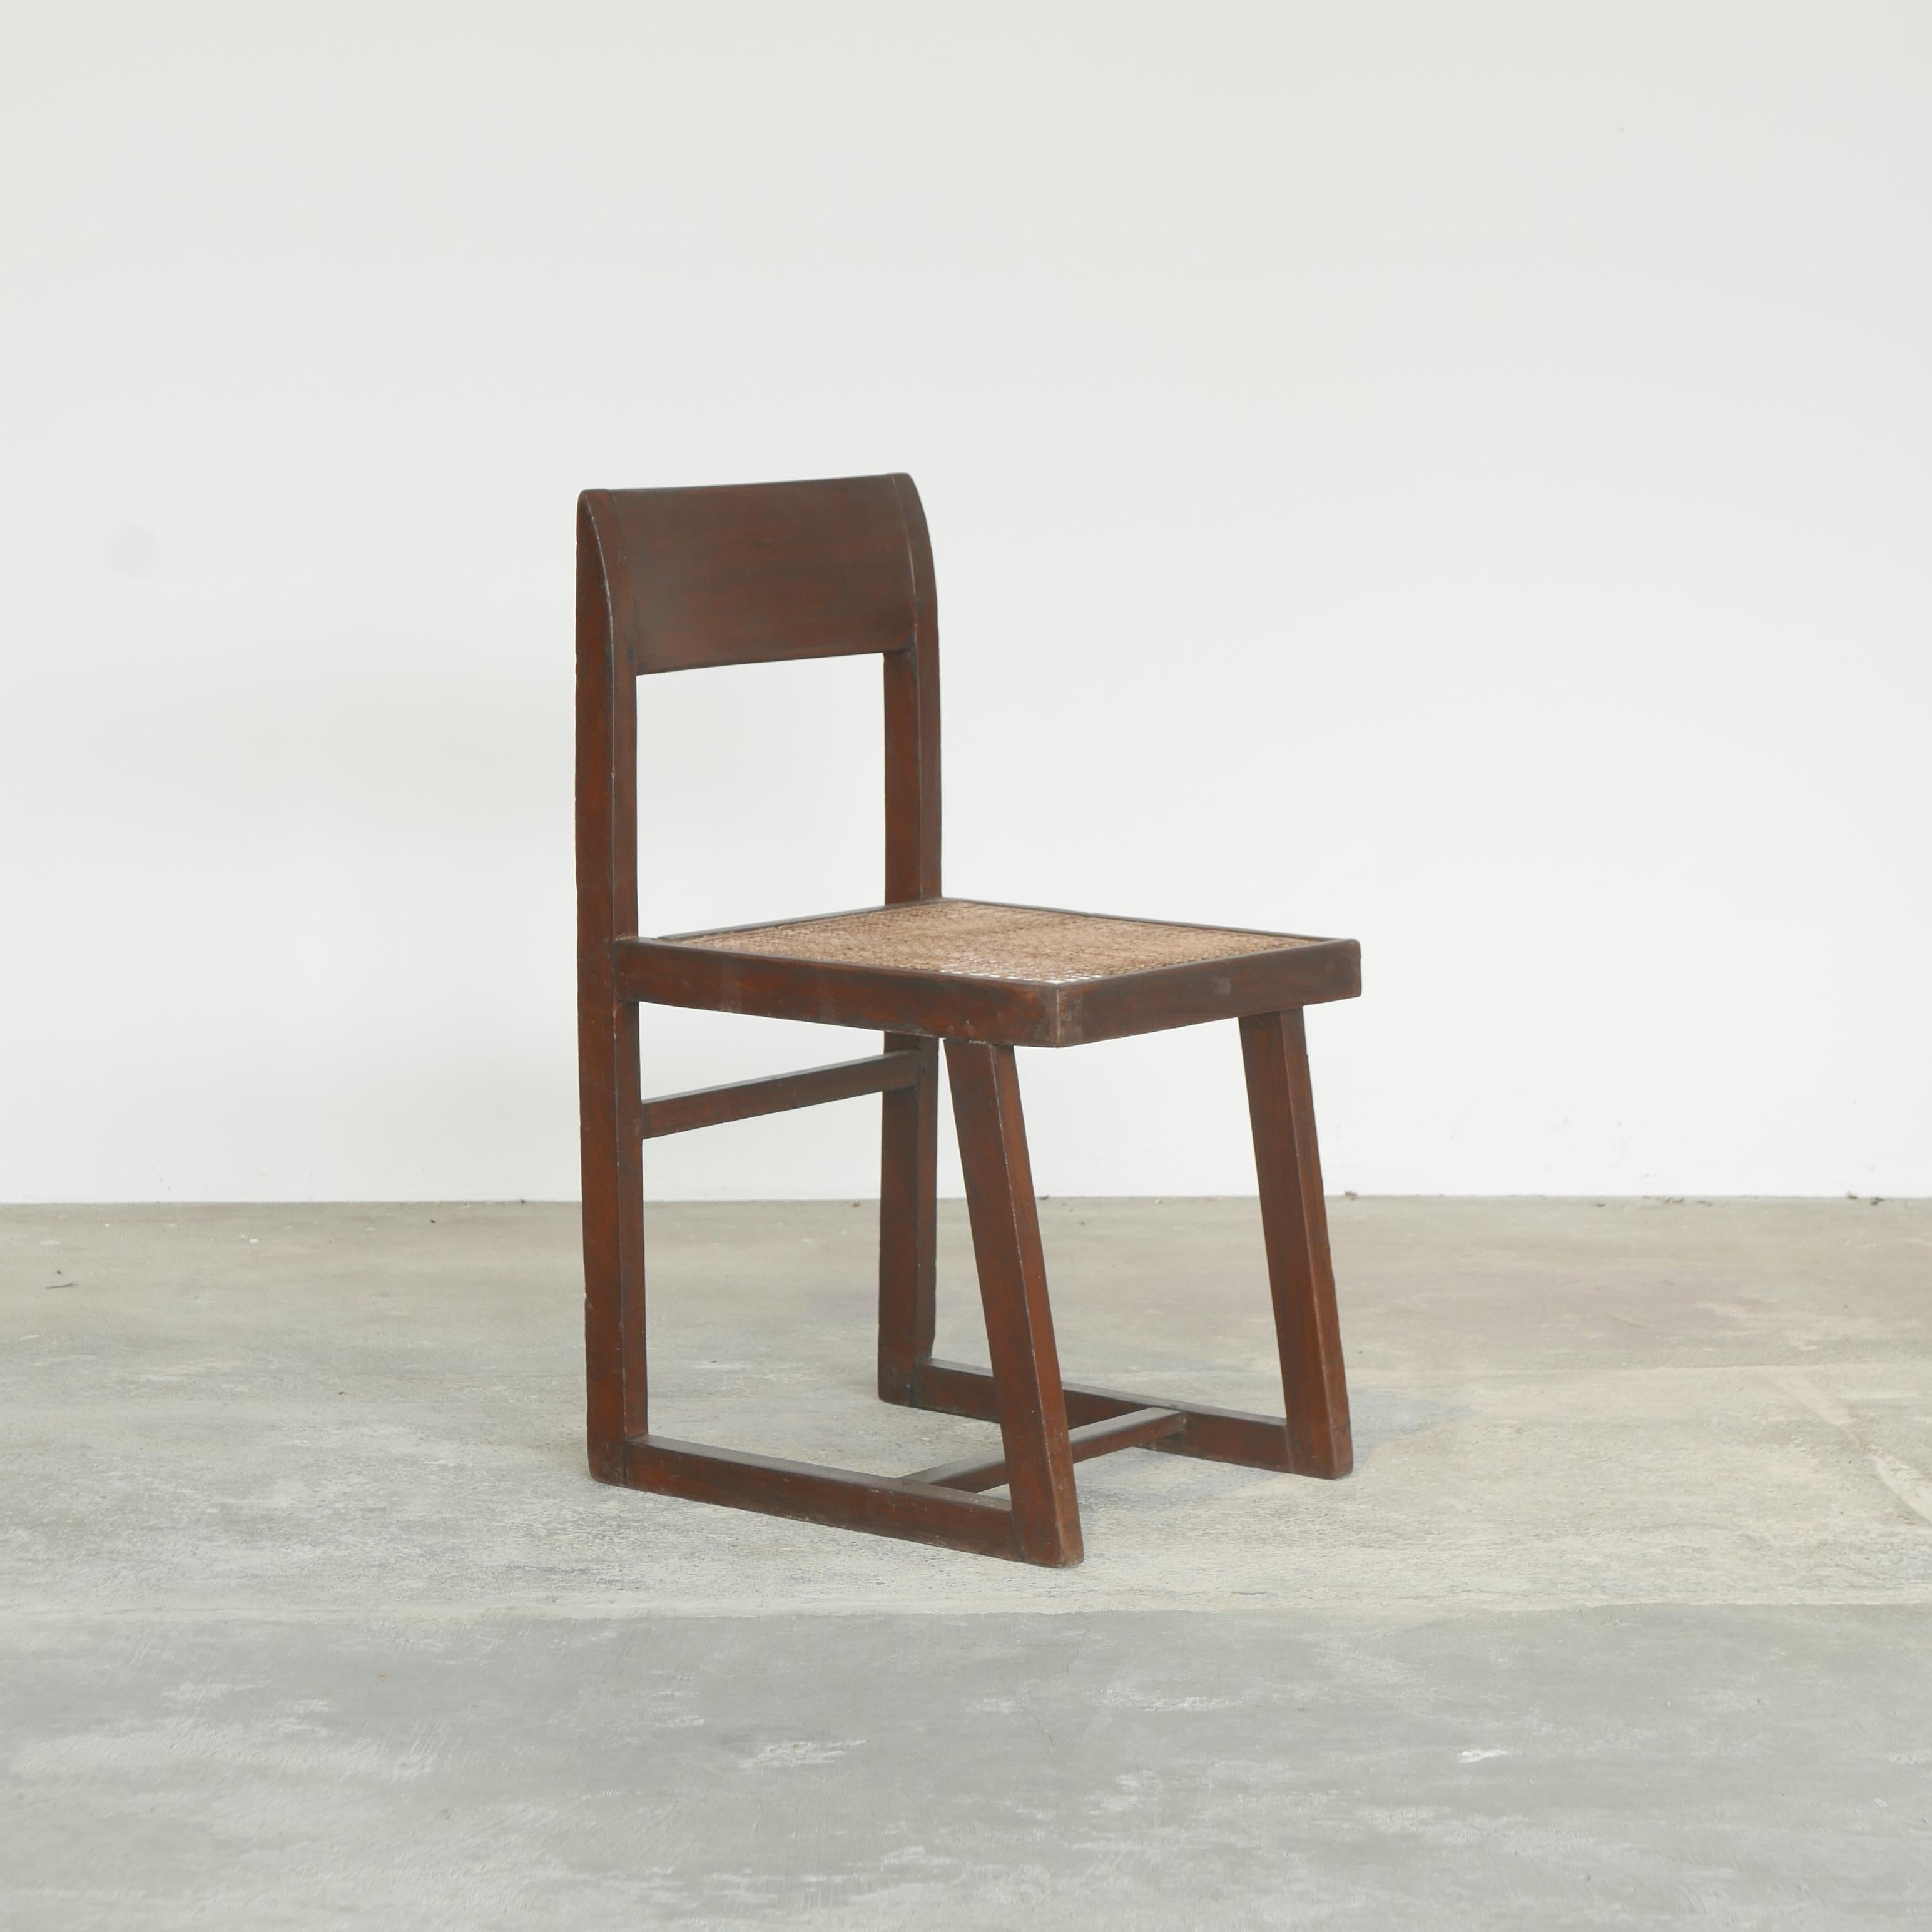 Mid-20th Century Pierre Jeanneret AUTHENTIC Box Chair with Cane and Teak from Chandigarh